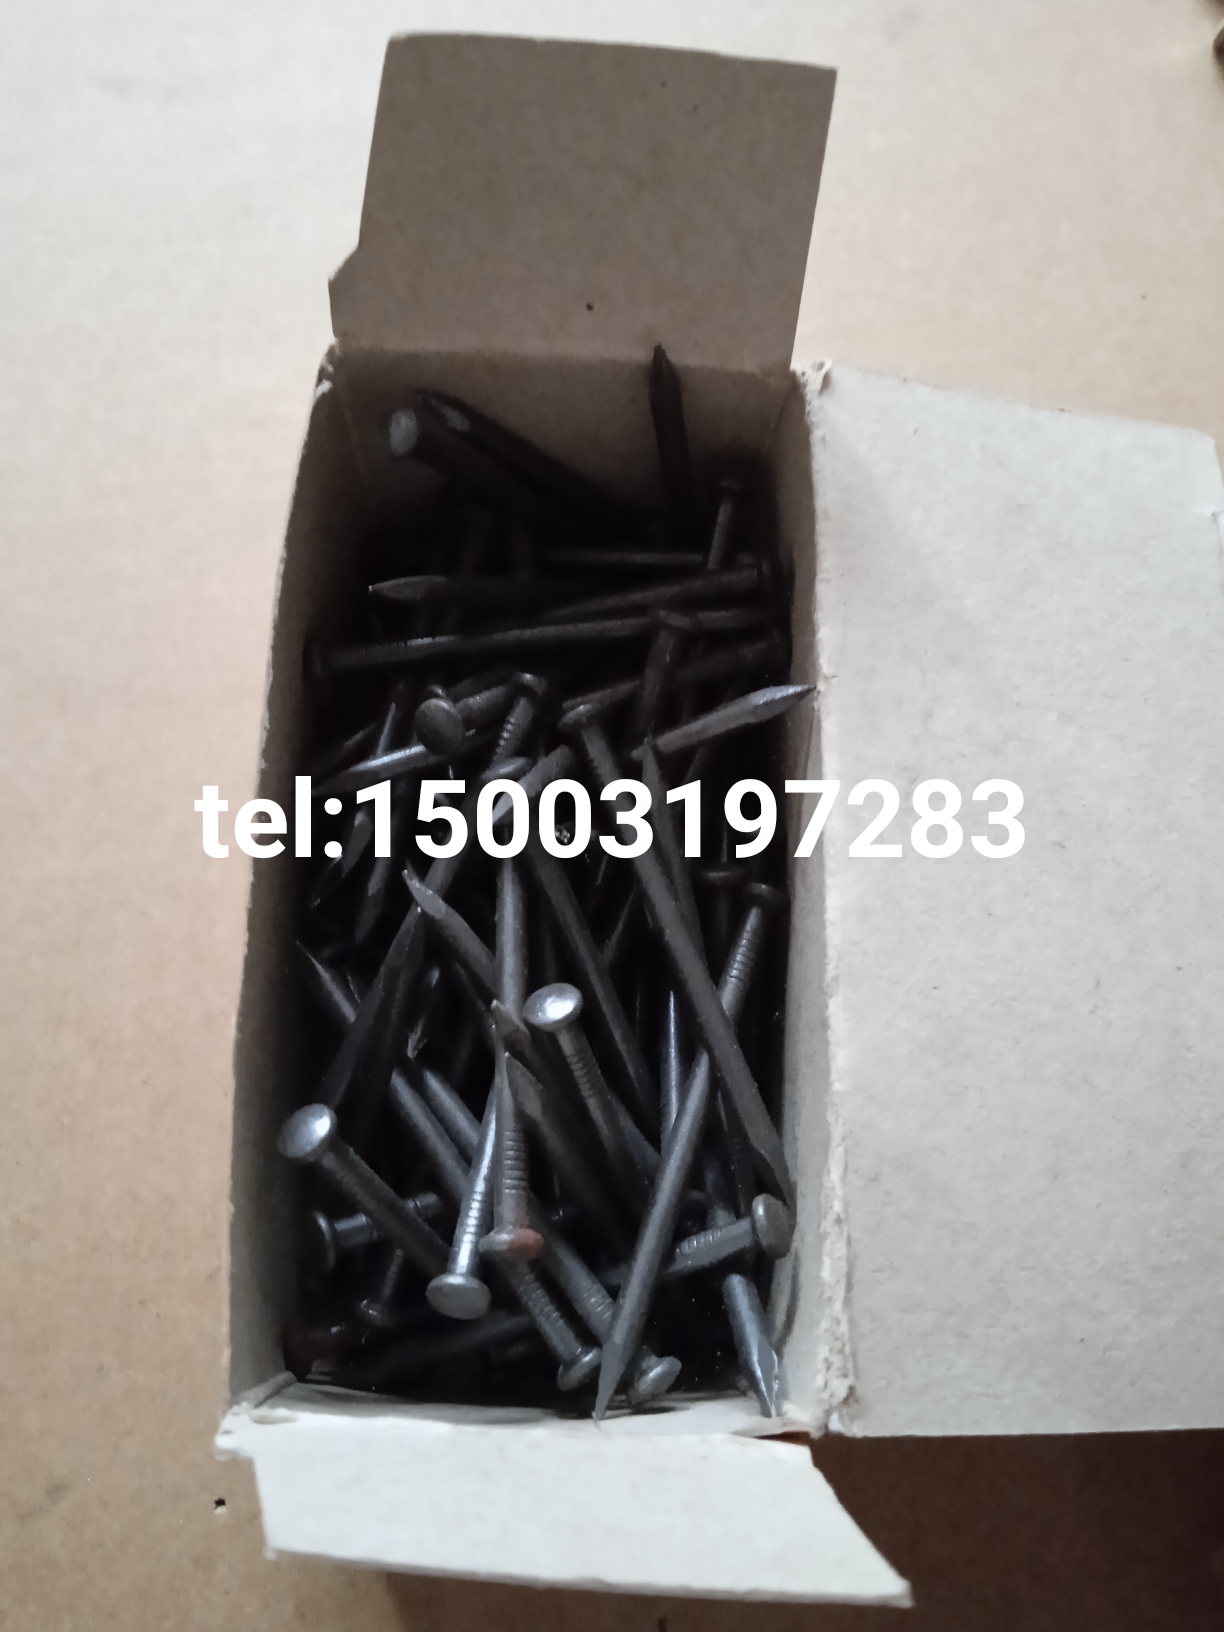 steel concrete nail galvanised concrete nail wire nail common nail sooth shank nail oval head nail black nails